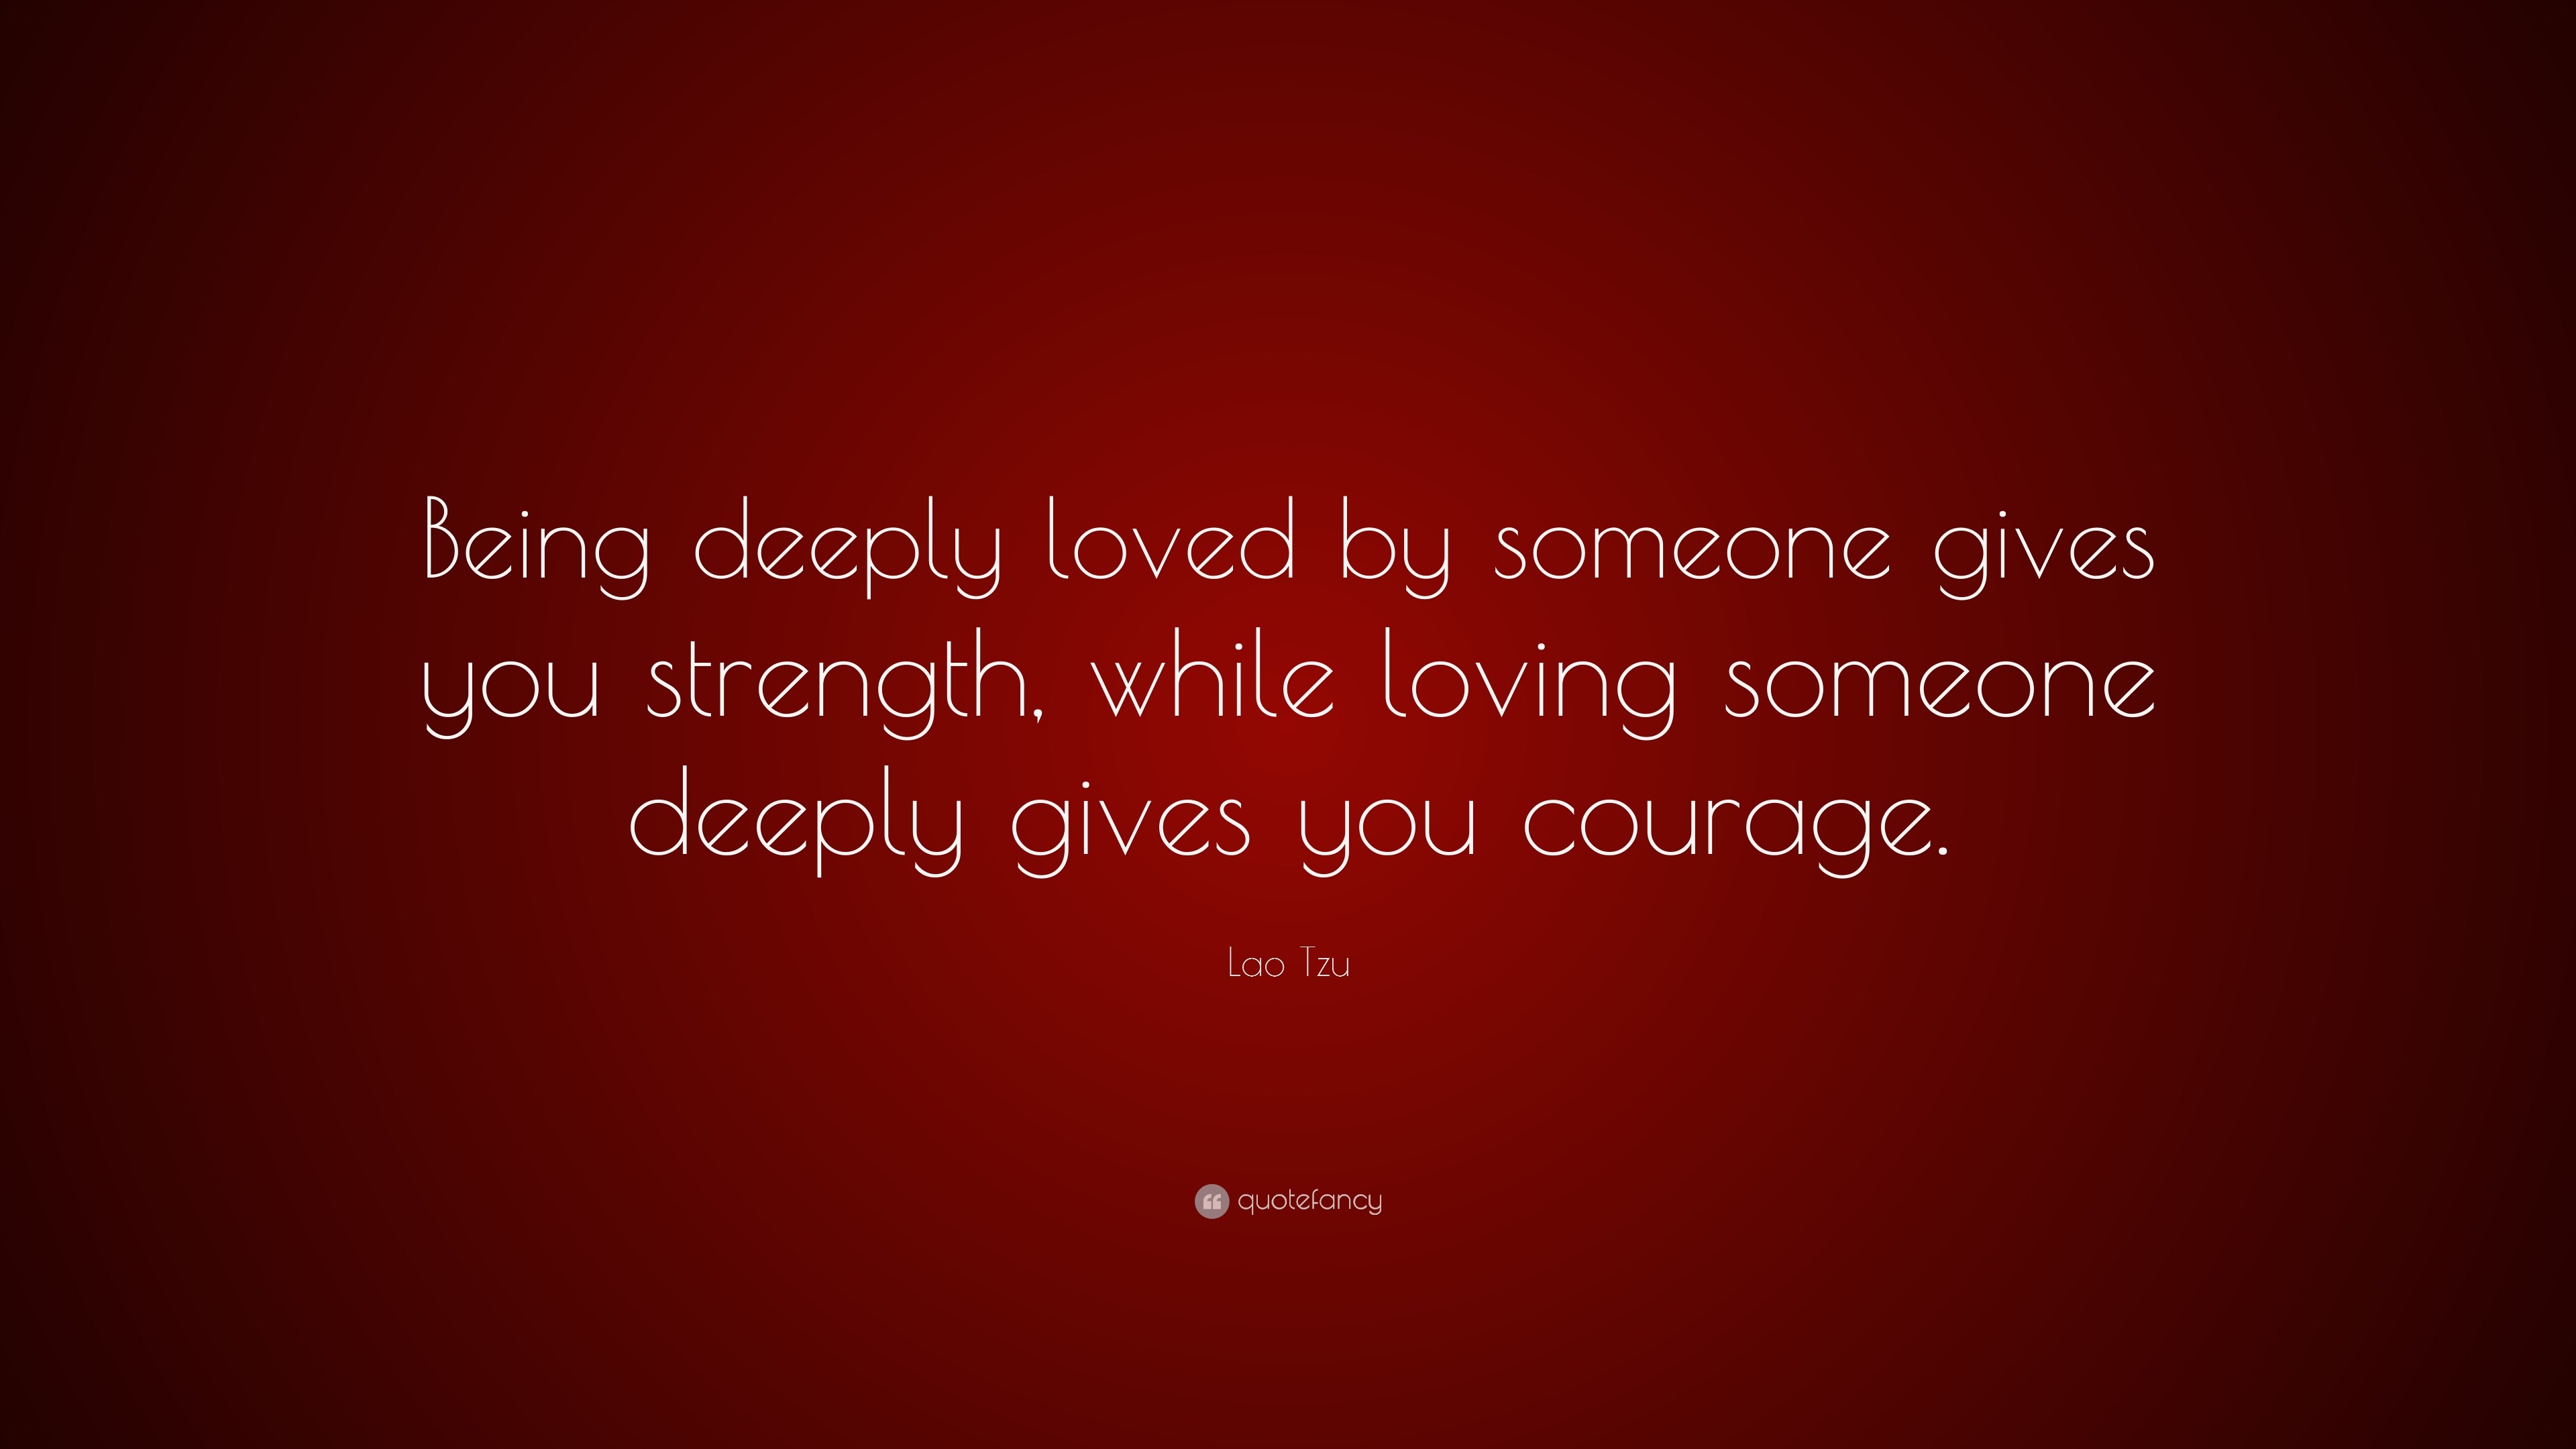 Lao Tzu Quote: “Being deeply loved by someone gives you strength, while ...